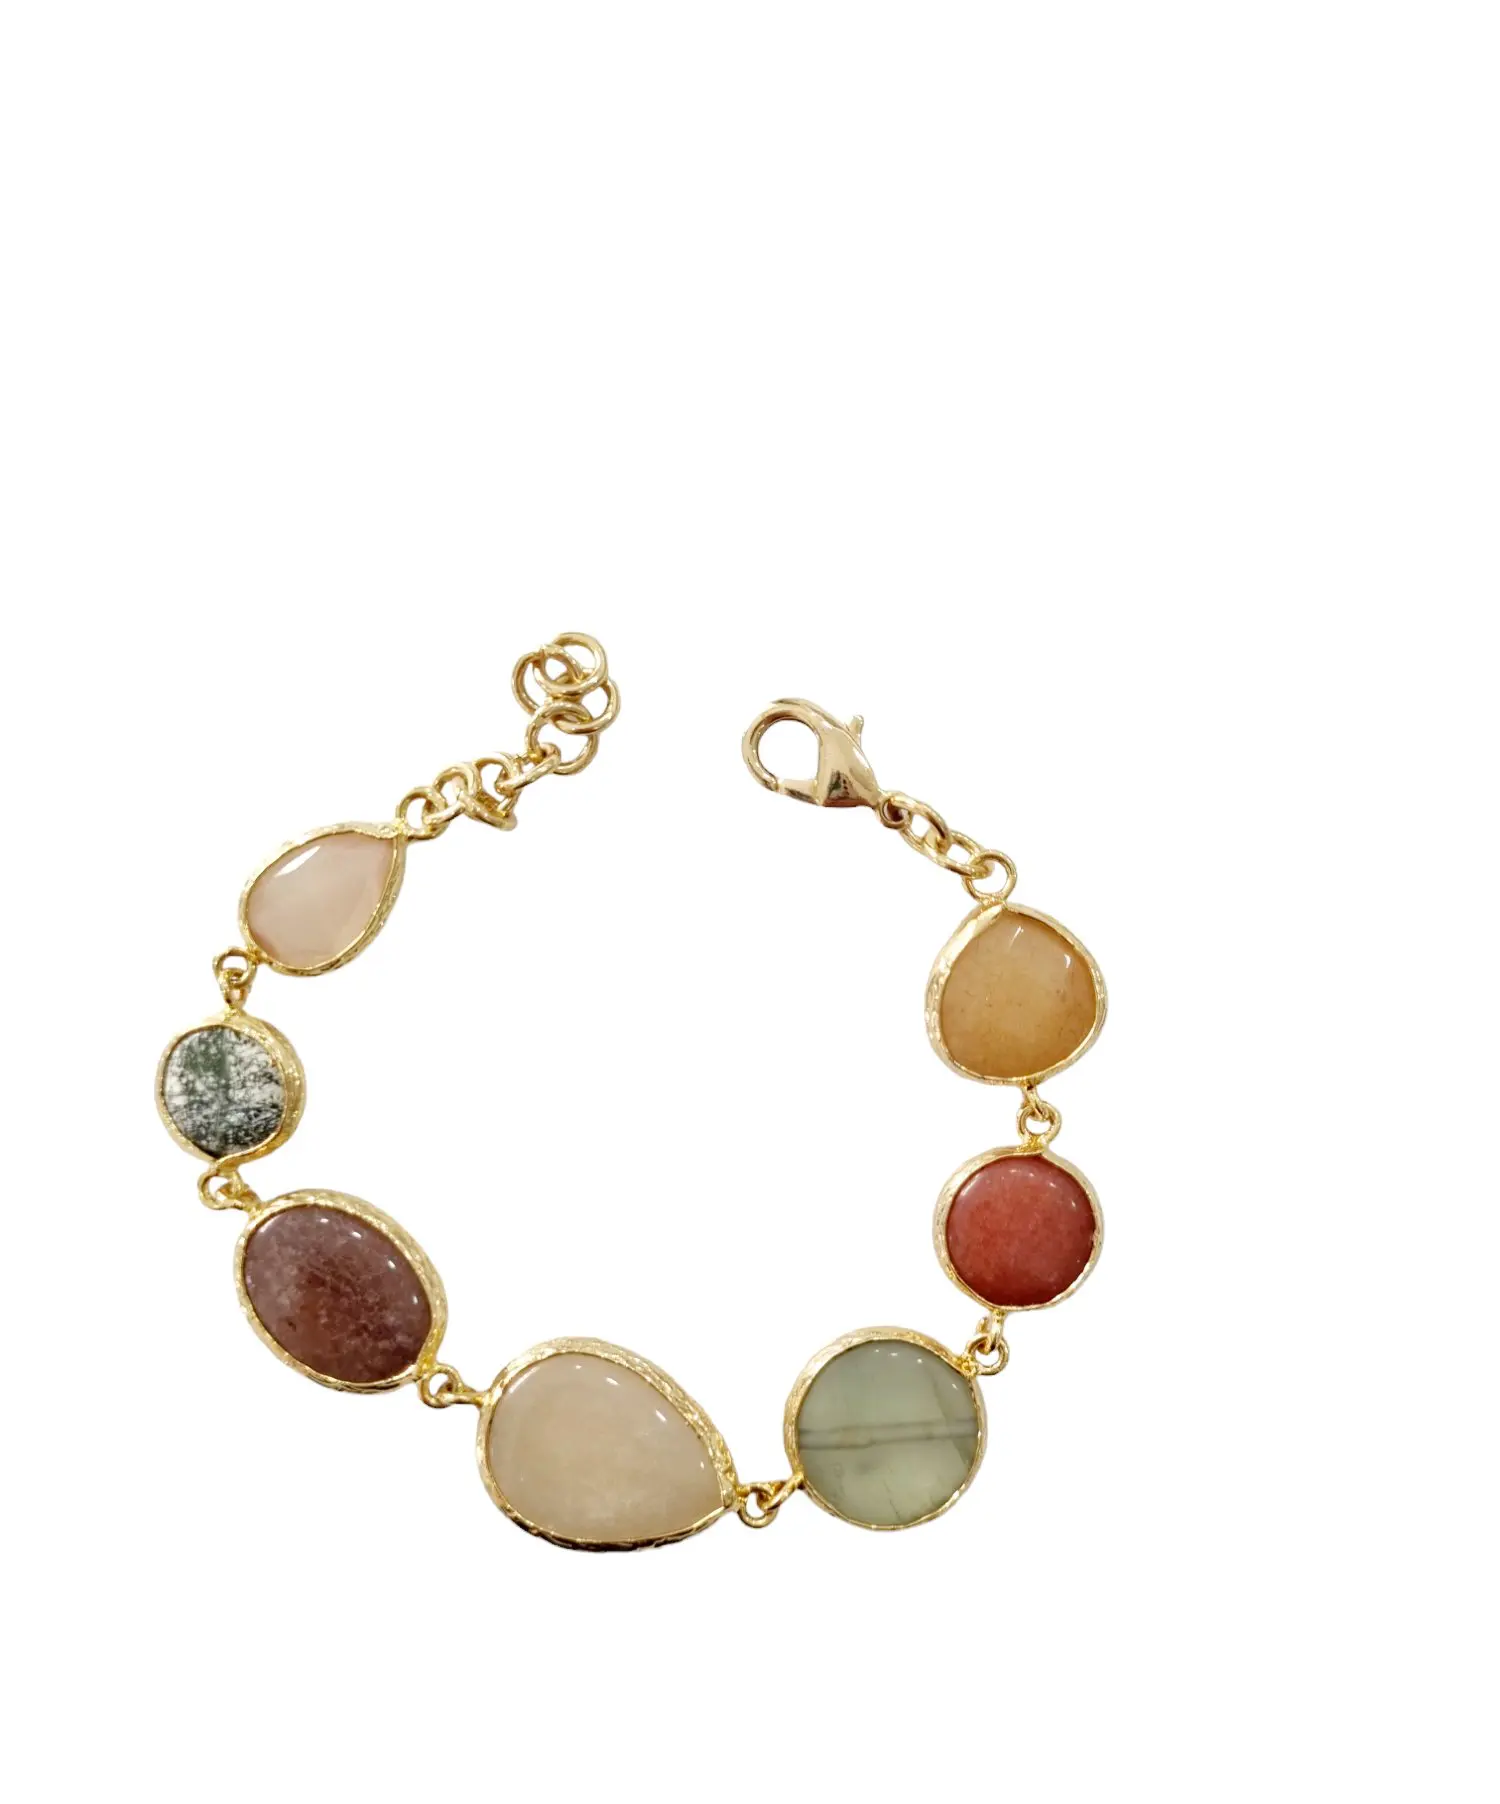 Bracelet made with agate surrounded by brass. Adjustable length up to 20cm